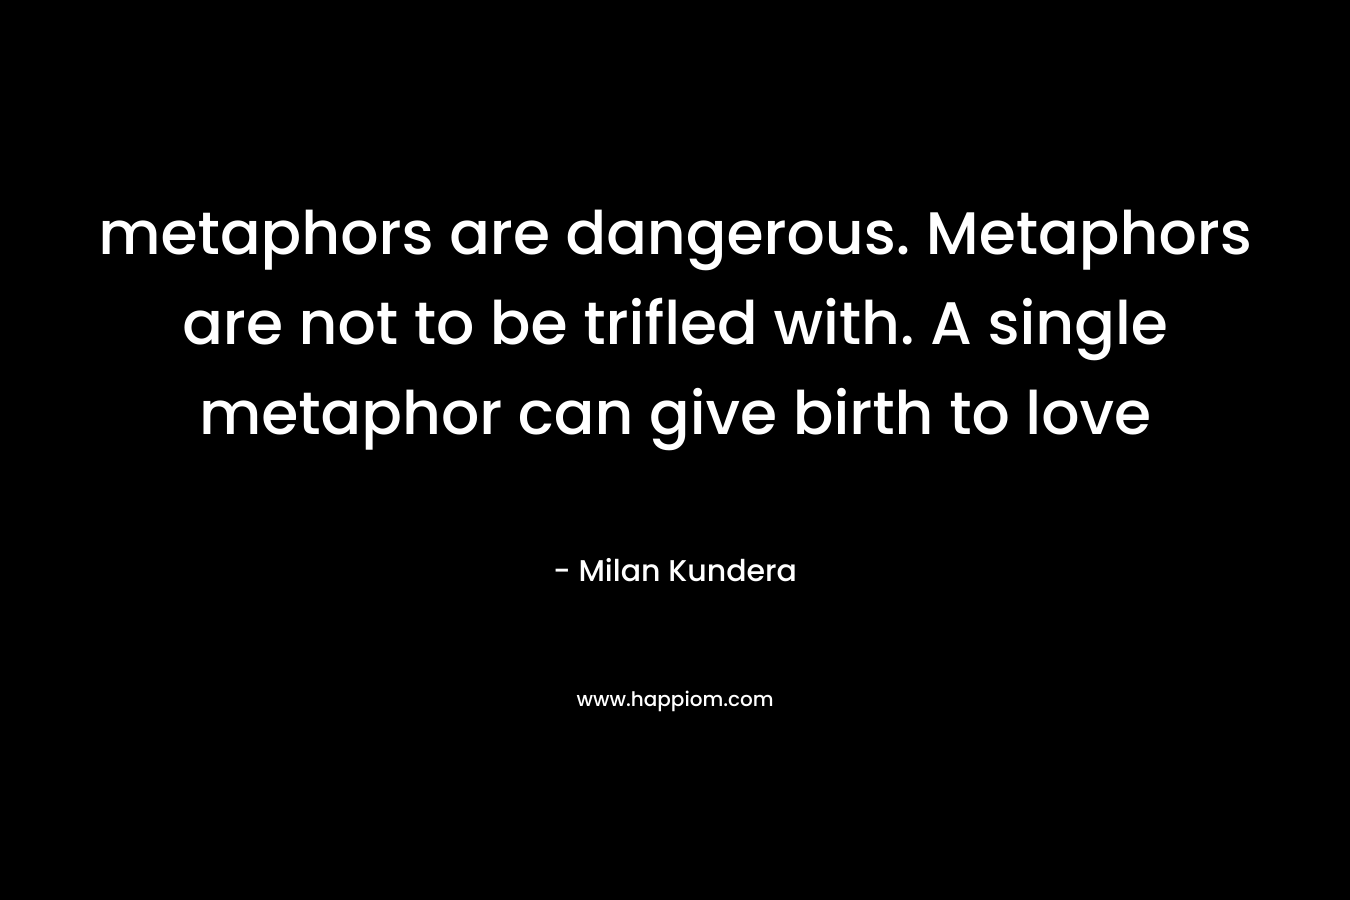 metaphors are dangerous. Metaphors are not to be trifled with. A single metaphor can give birth to love – Milan Kundera